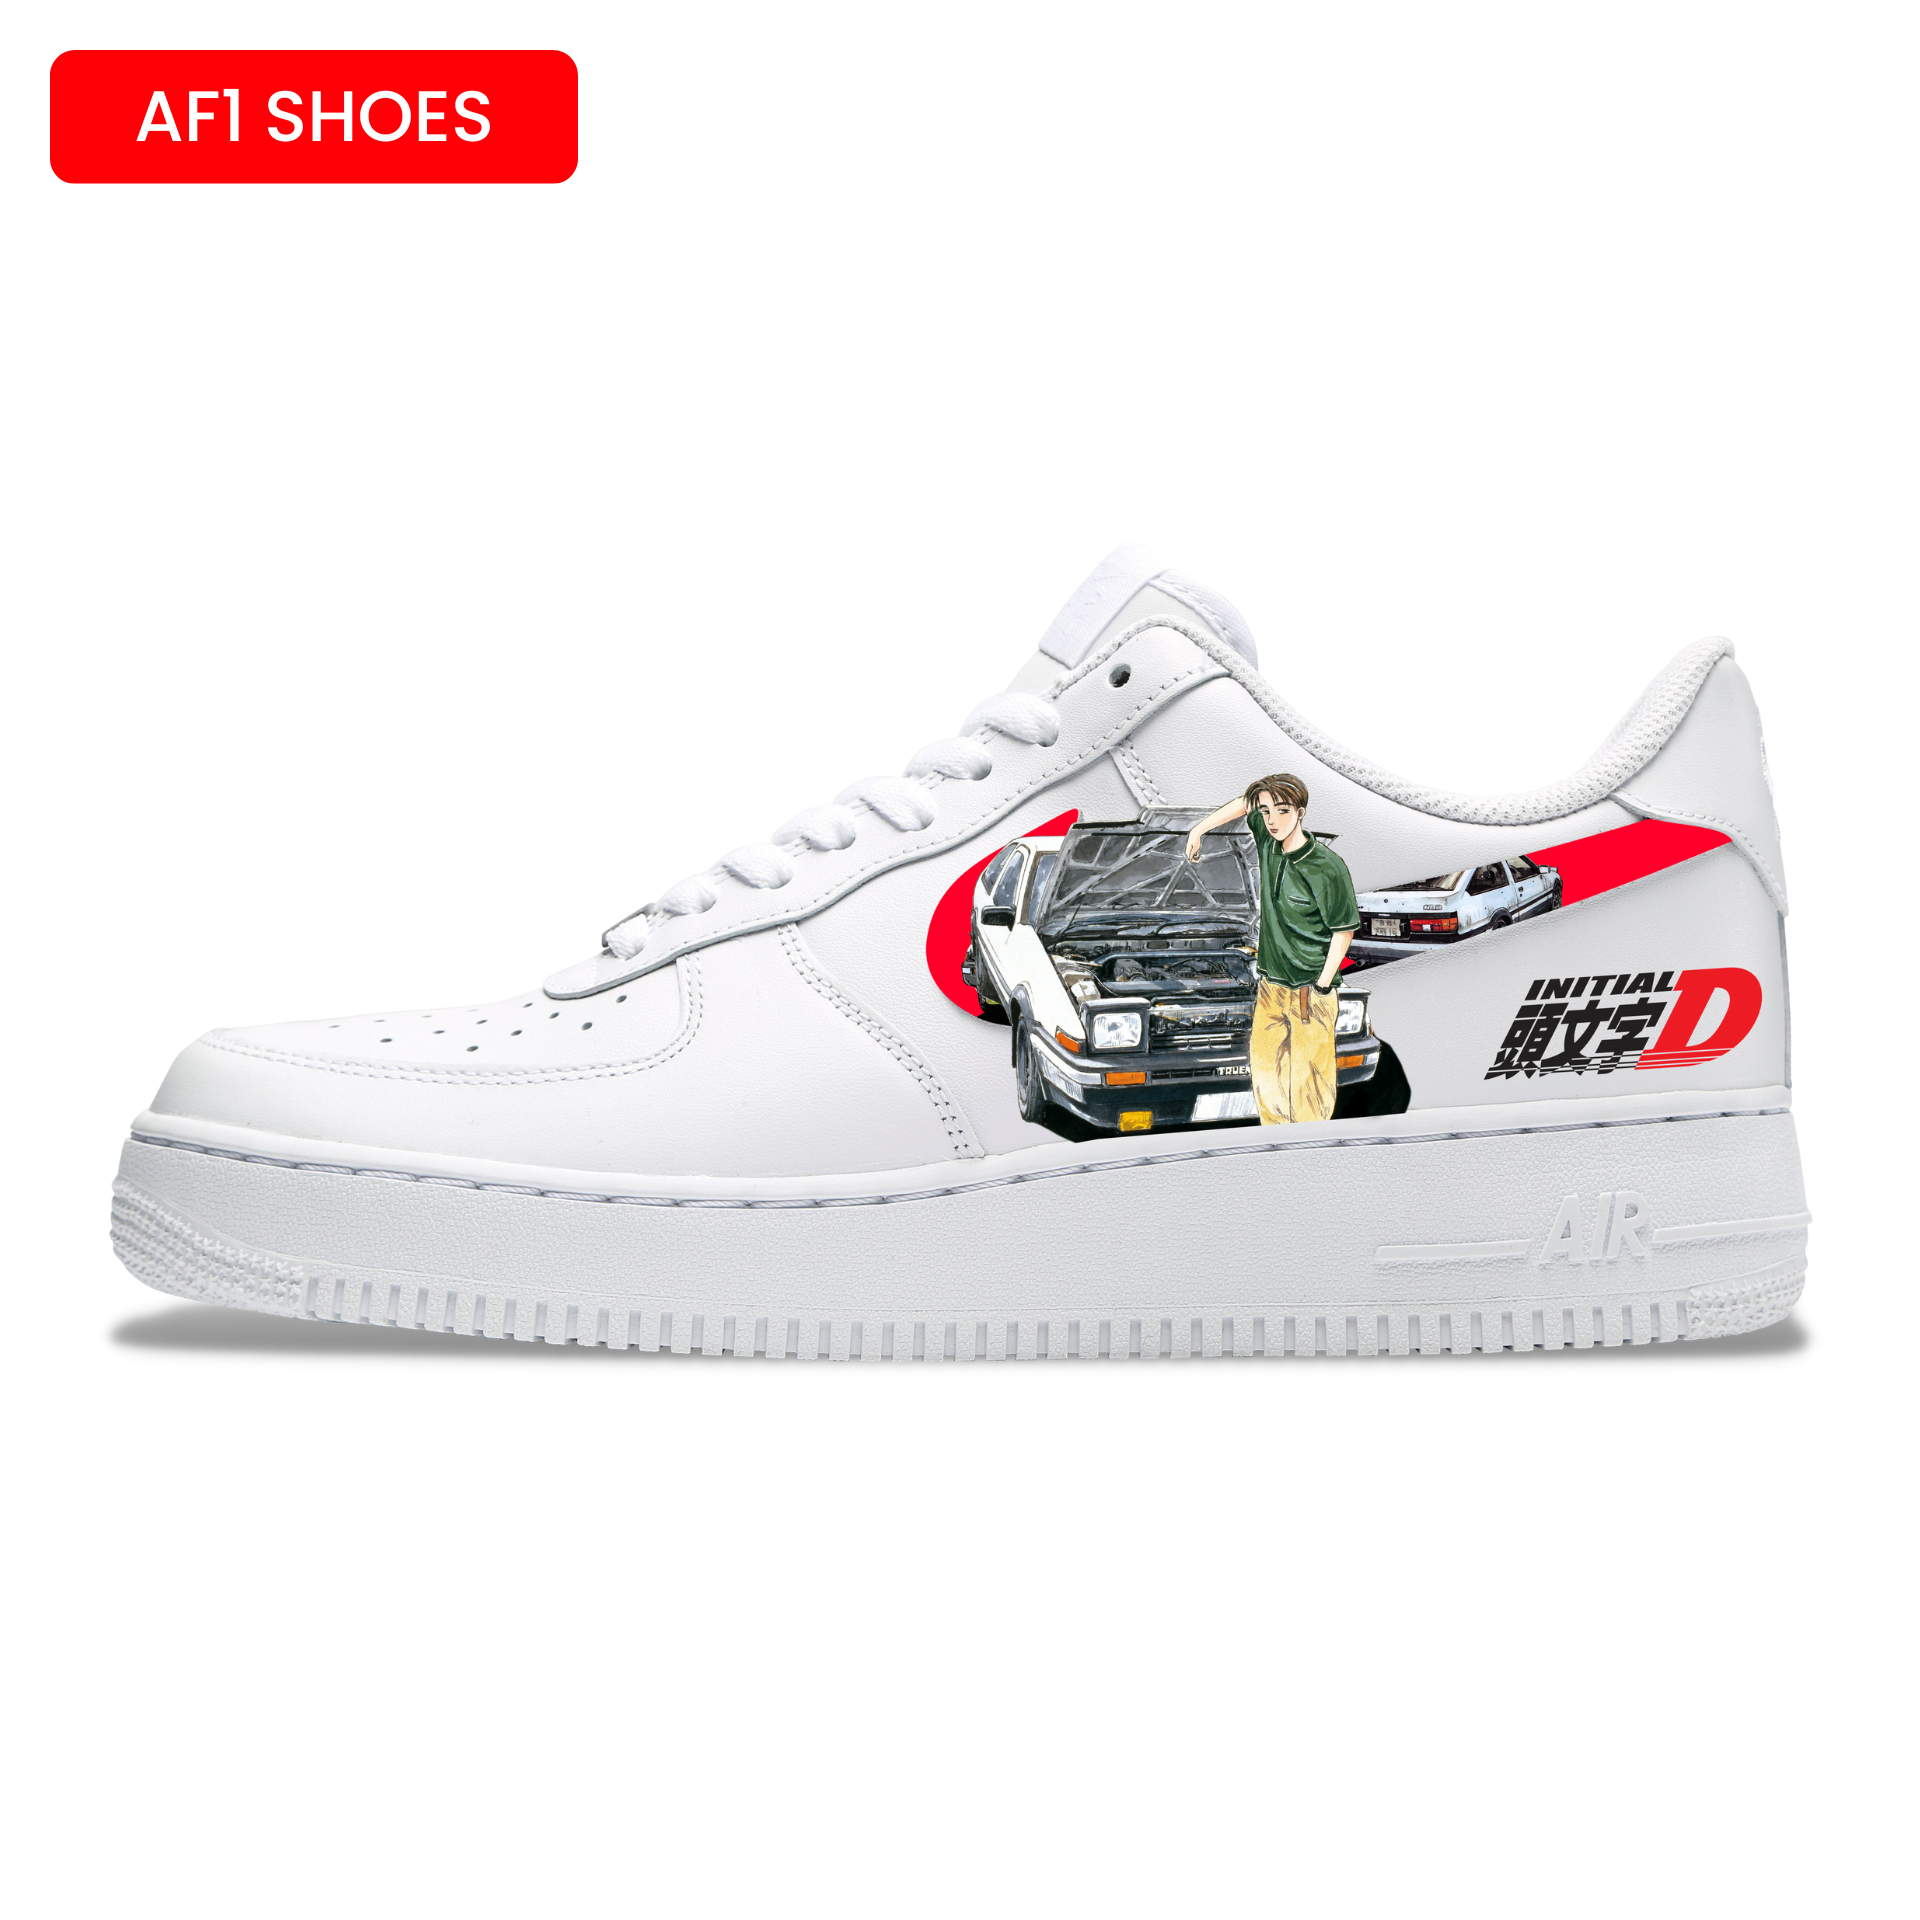 TAKUMI'S AE86 AF1 SHOES | INITIAL D | ANIME